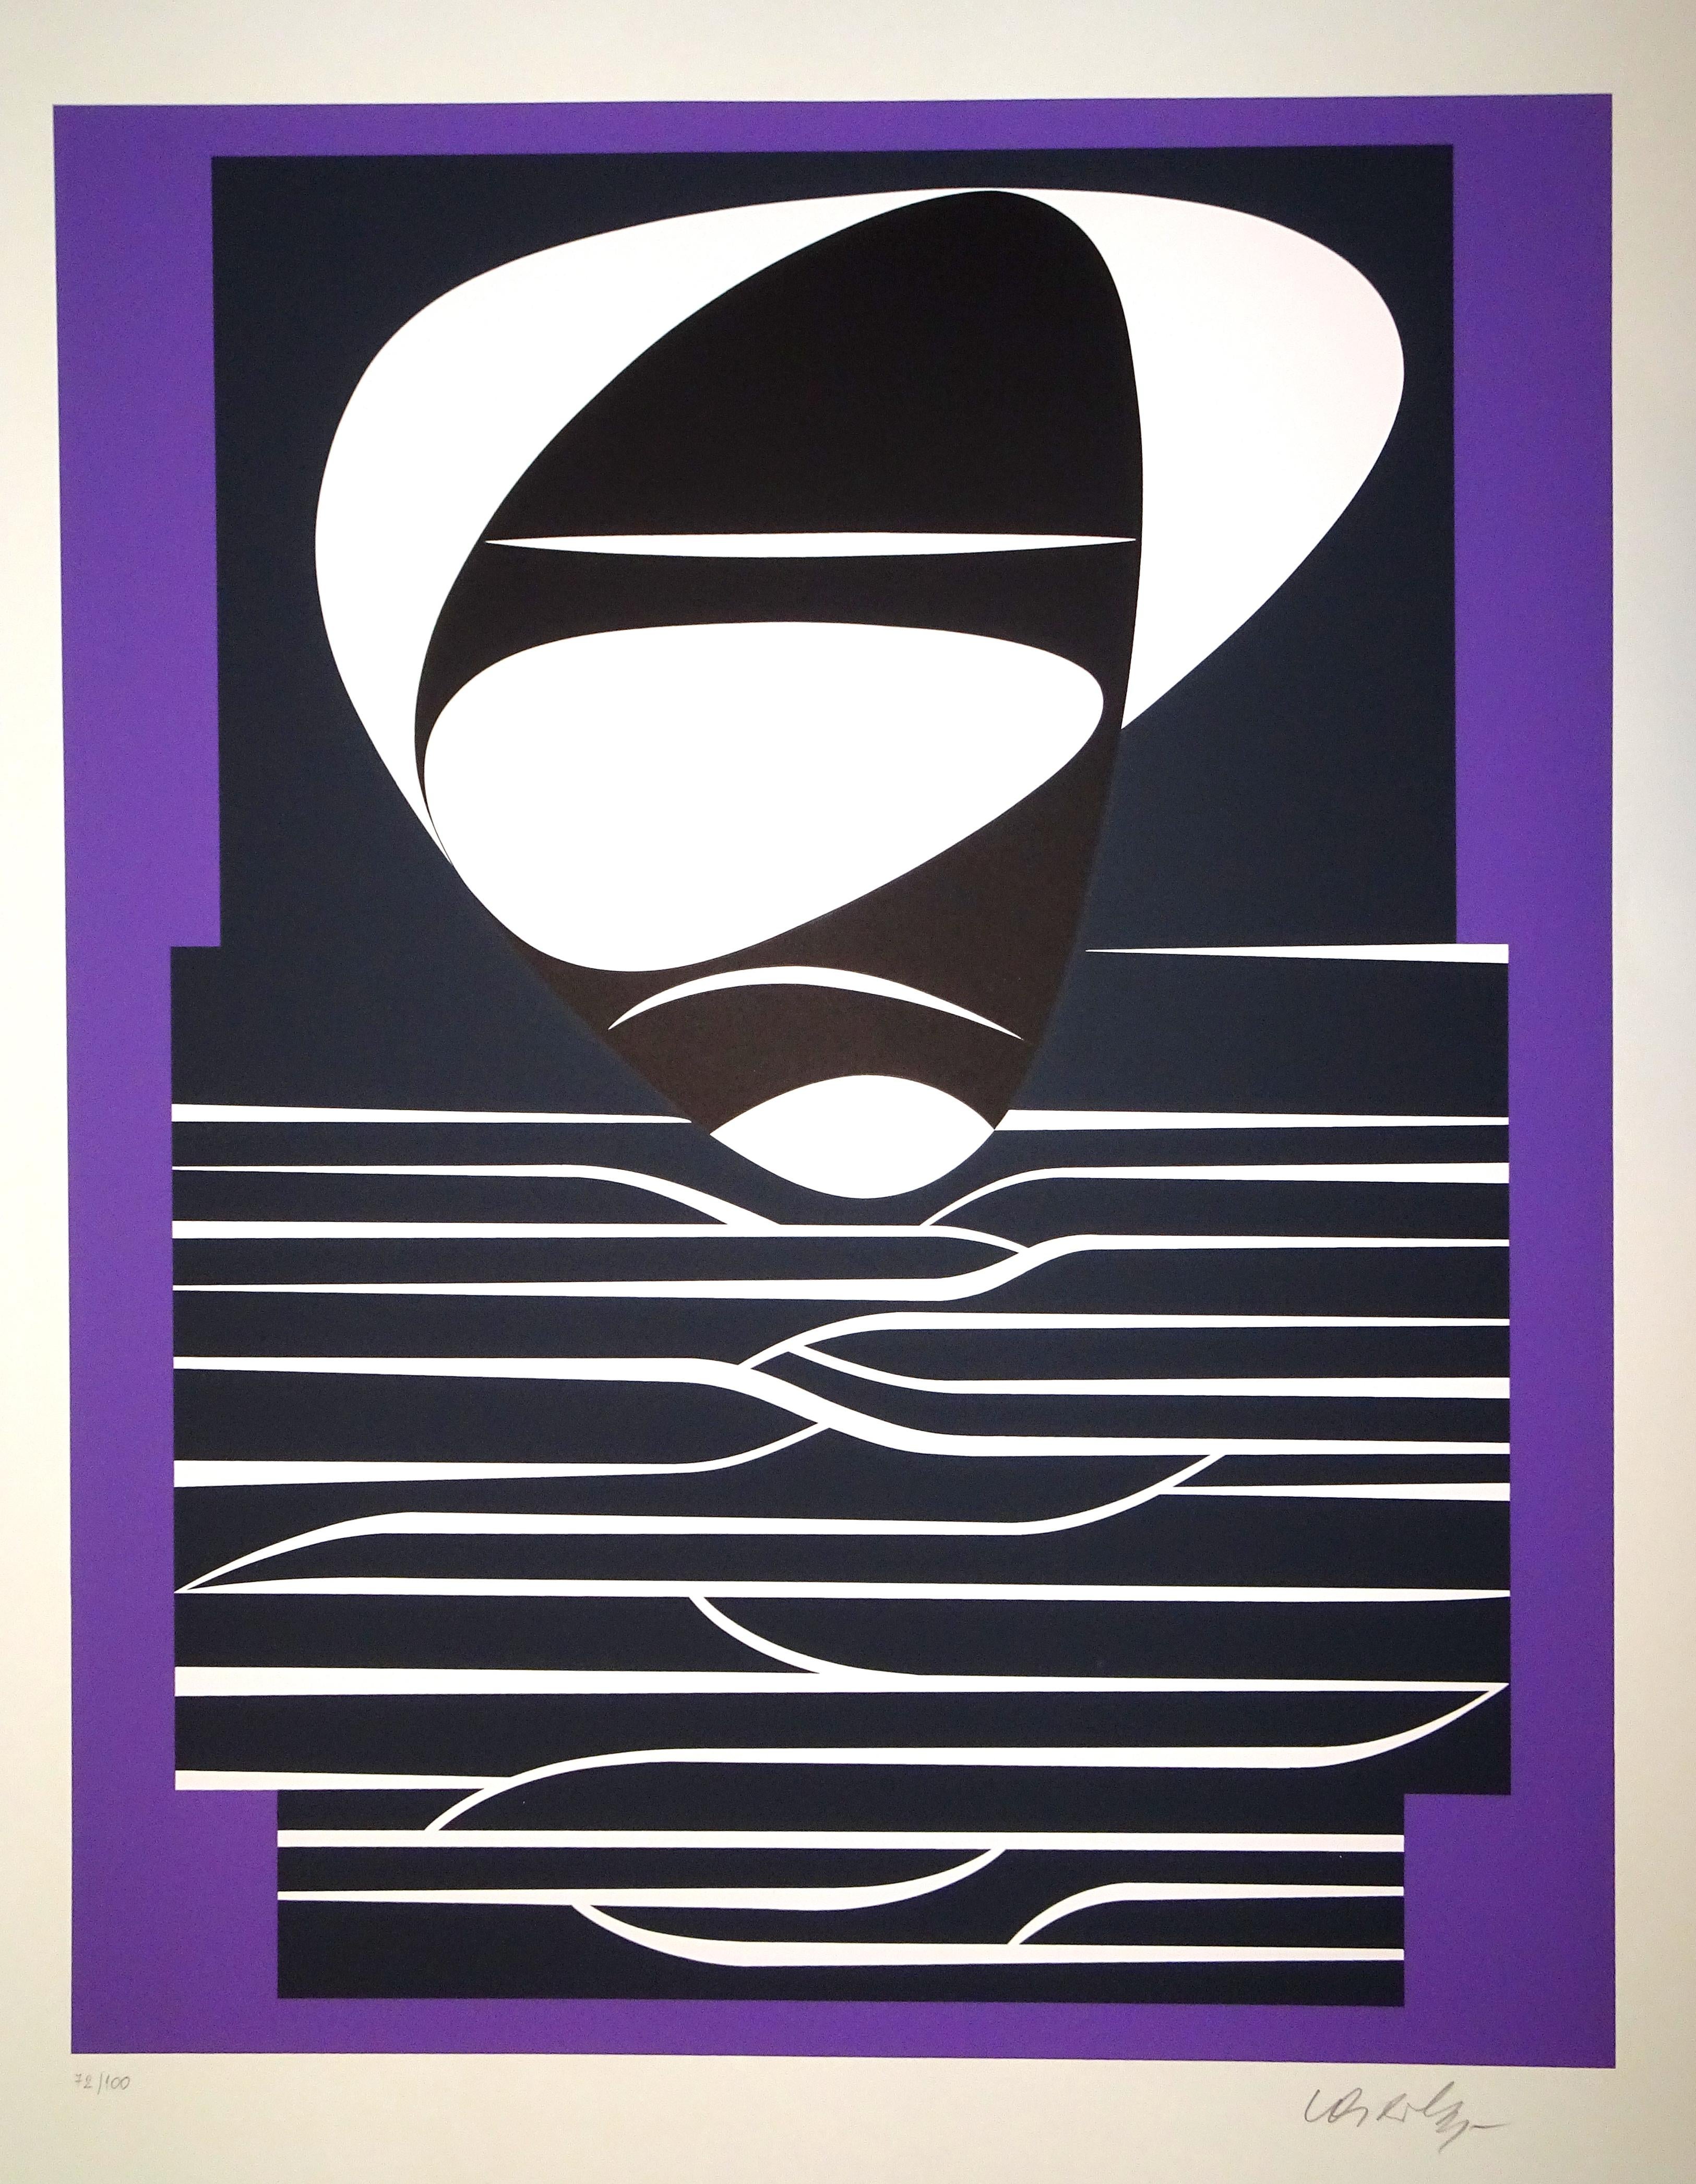 Purple Composition is a beautiful serigraph with a purple, black, and white abstract composition realized by Victor Vasarely.
The plate is from the portfolio Les Années Cinquante edited by Pesti Mühely, Budapest, in 1989. Hand-signed by the artist